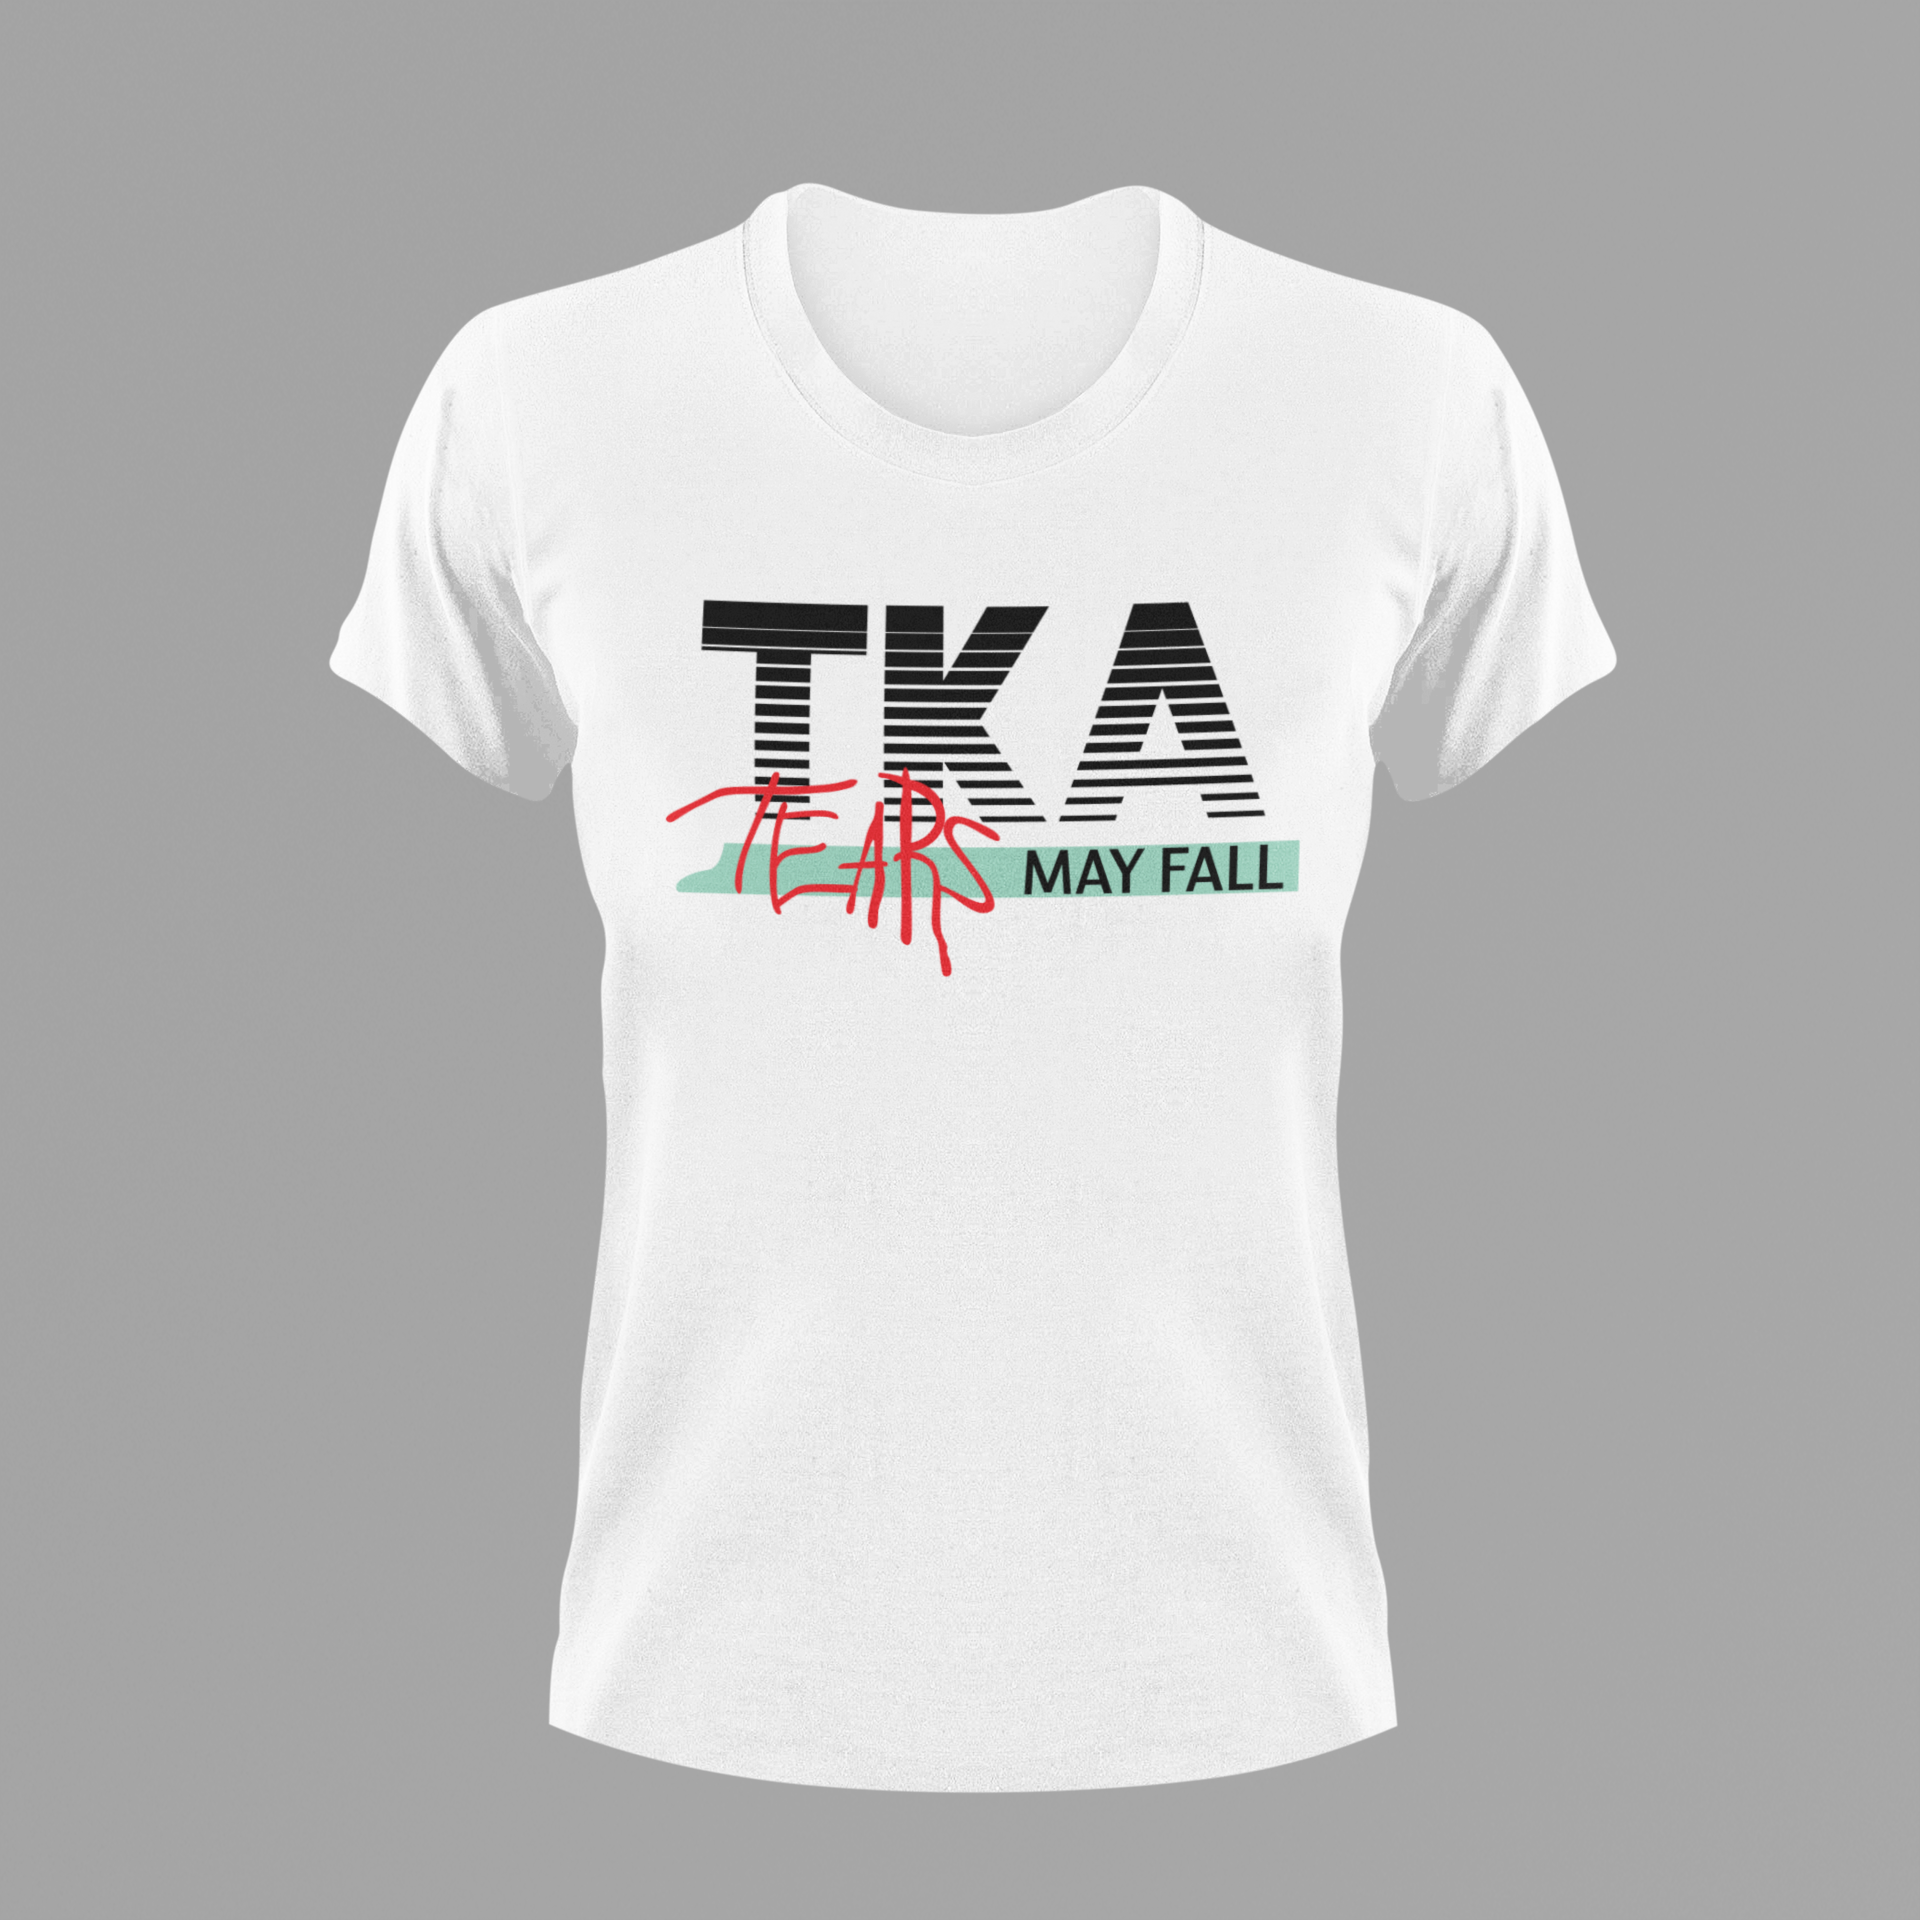 Brought to you by "TONY TKA”Tears May Fall”Official Limited Edition Retro Logo Tee.